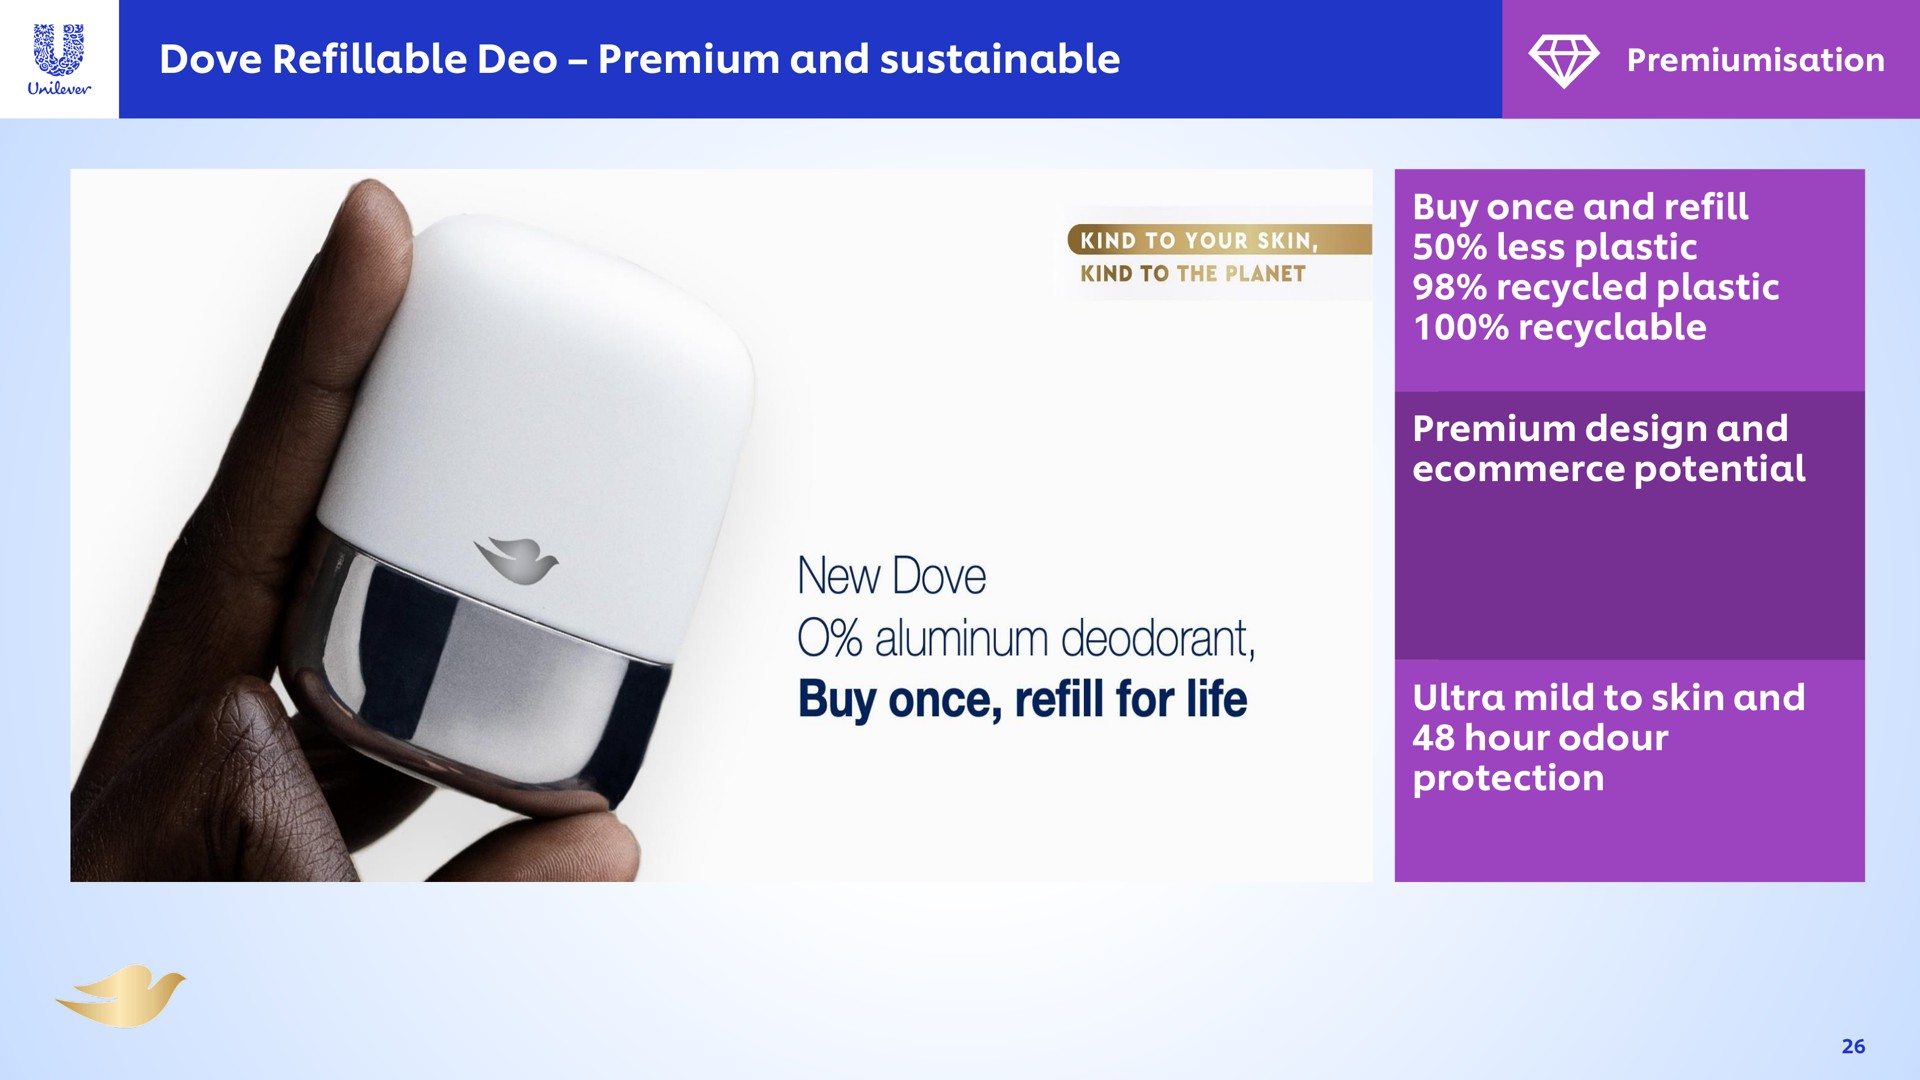 new dove aluminum deodorant buy once refill for life ultra mild to skin and | Unilever